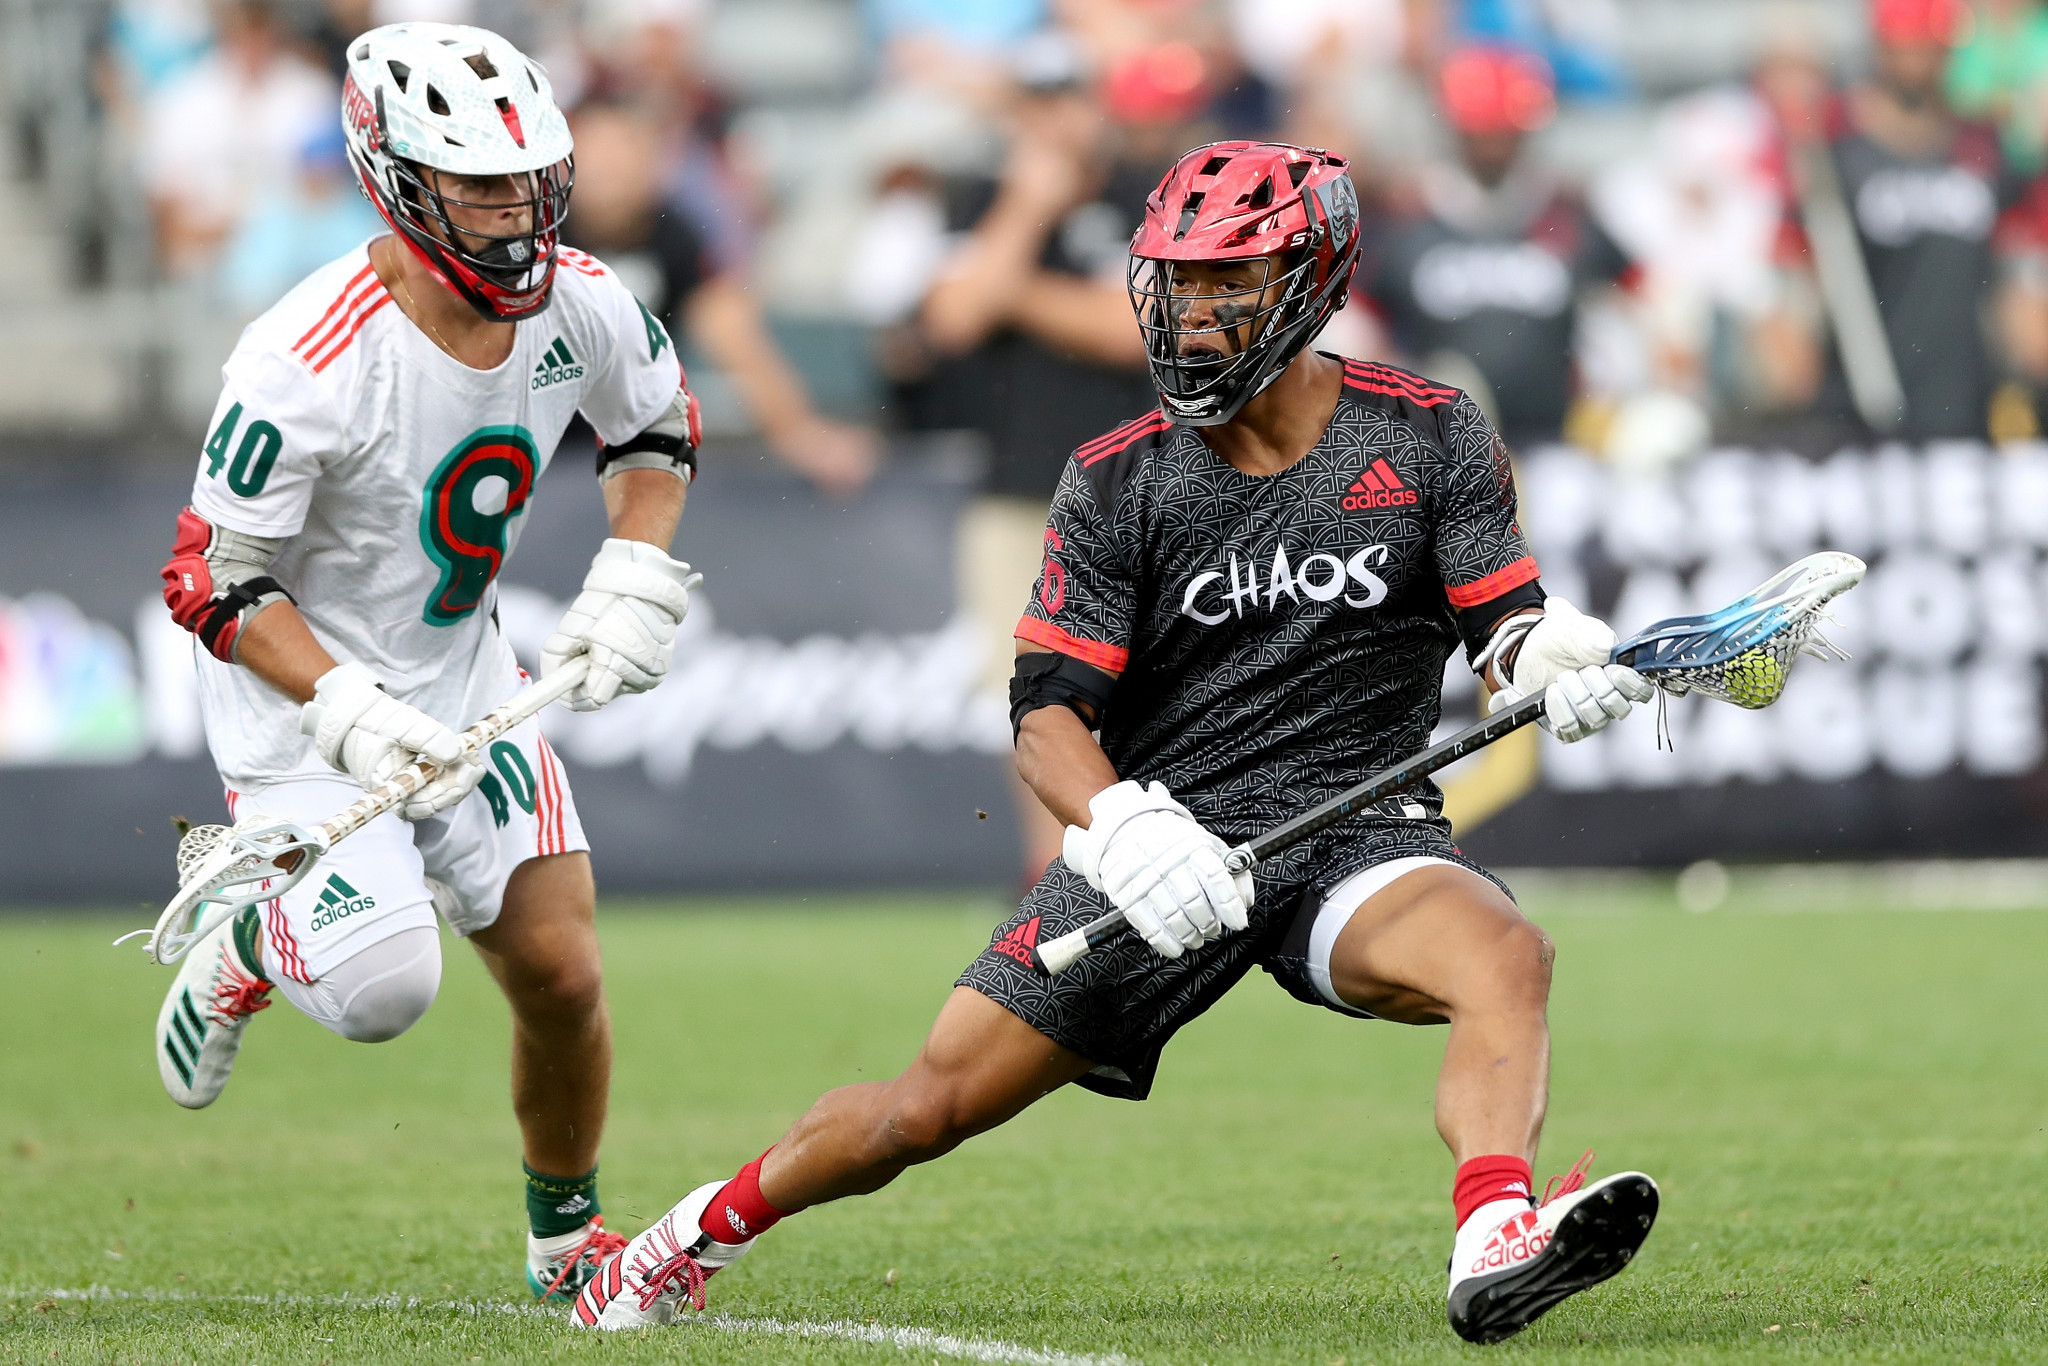 This year's Premier Lacrosse League season is to be held as a two-week tournament due to the pandemic ©Getty Images